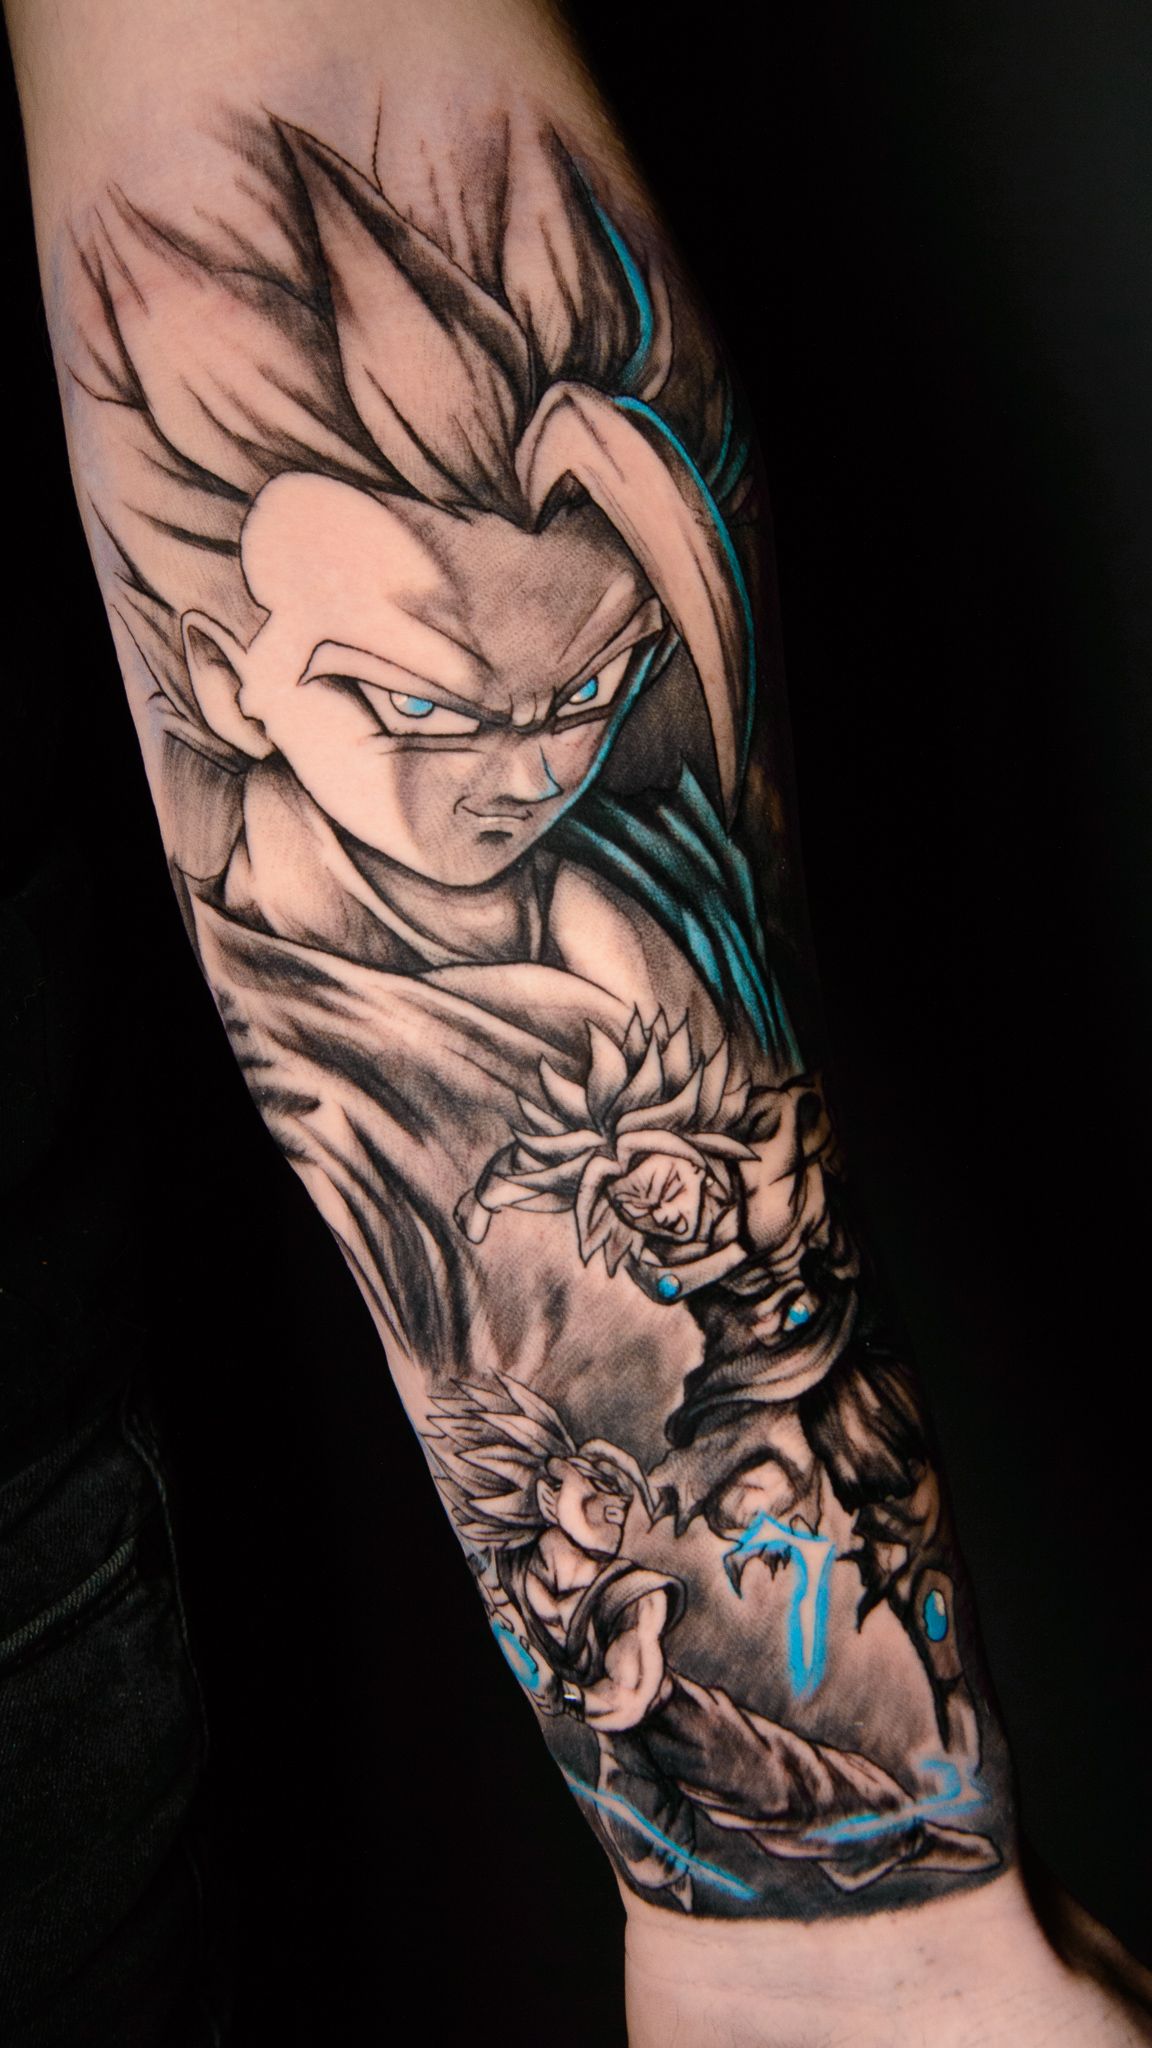 This Dragon Ball Tattoo Might Be One of the Best Yet